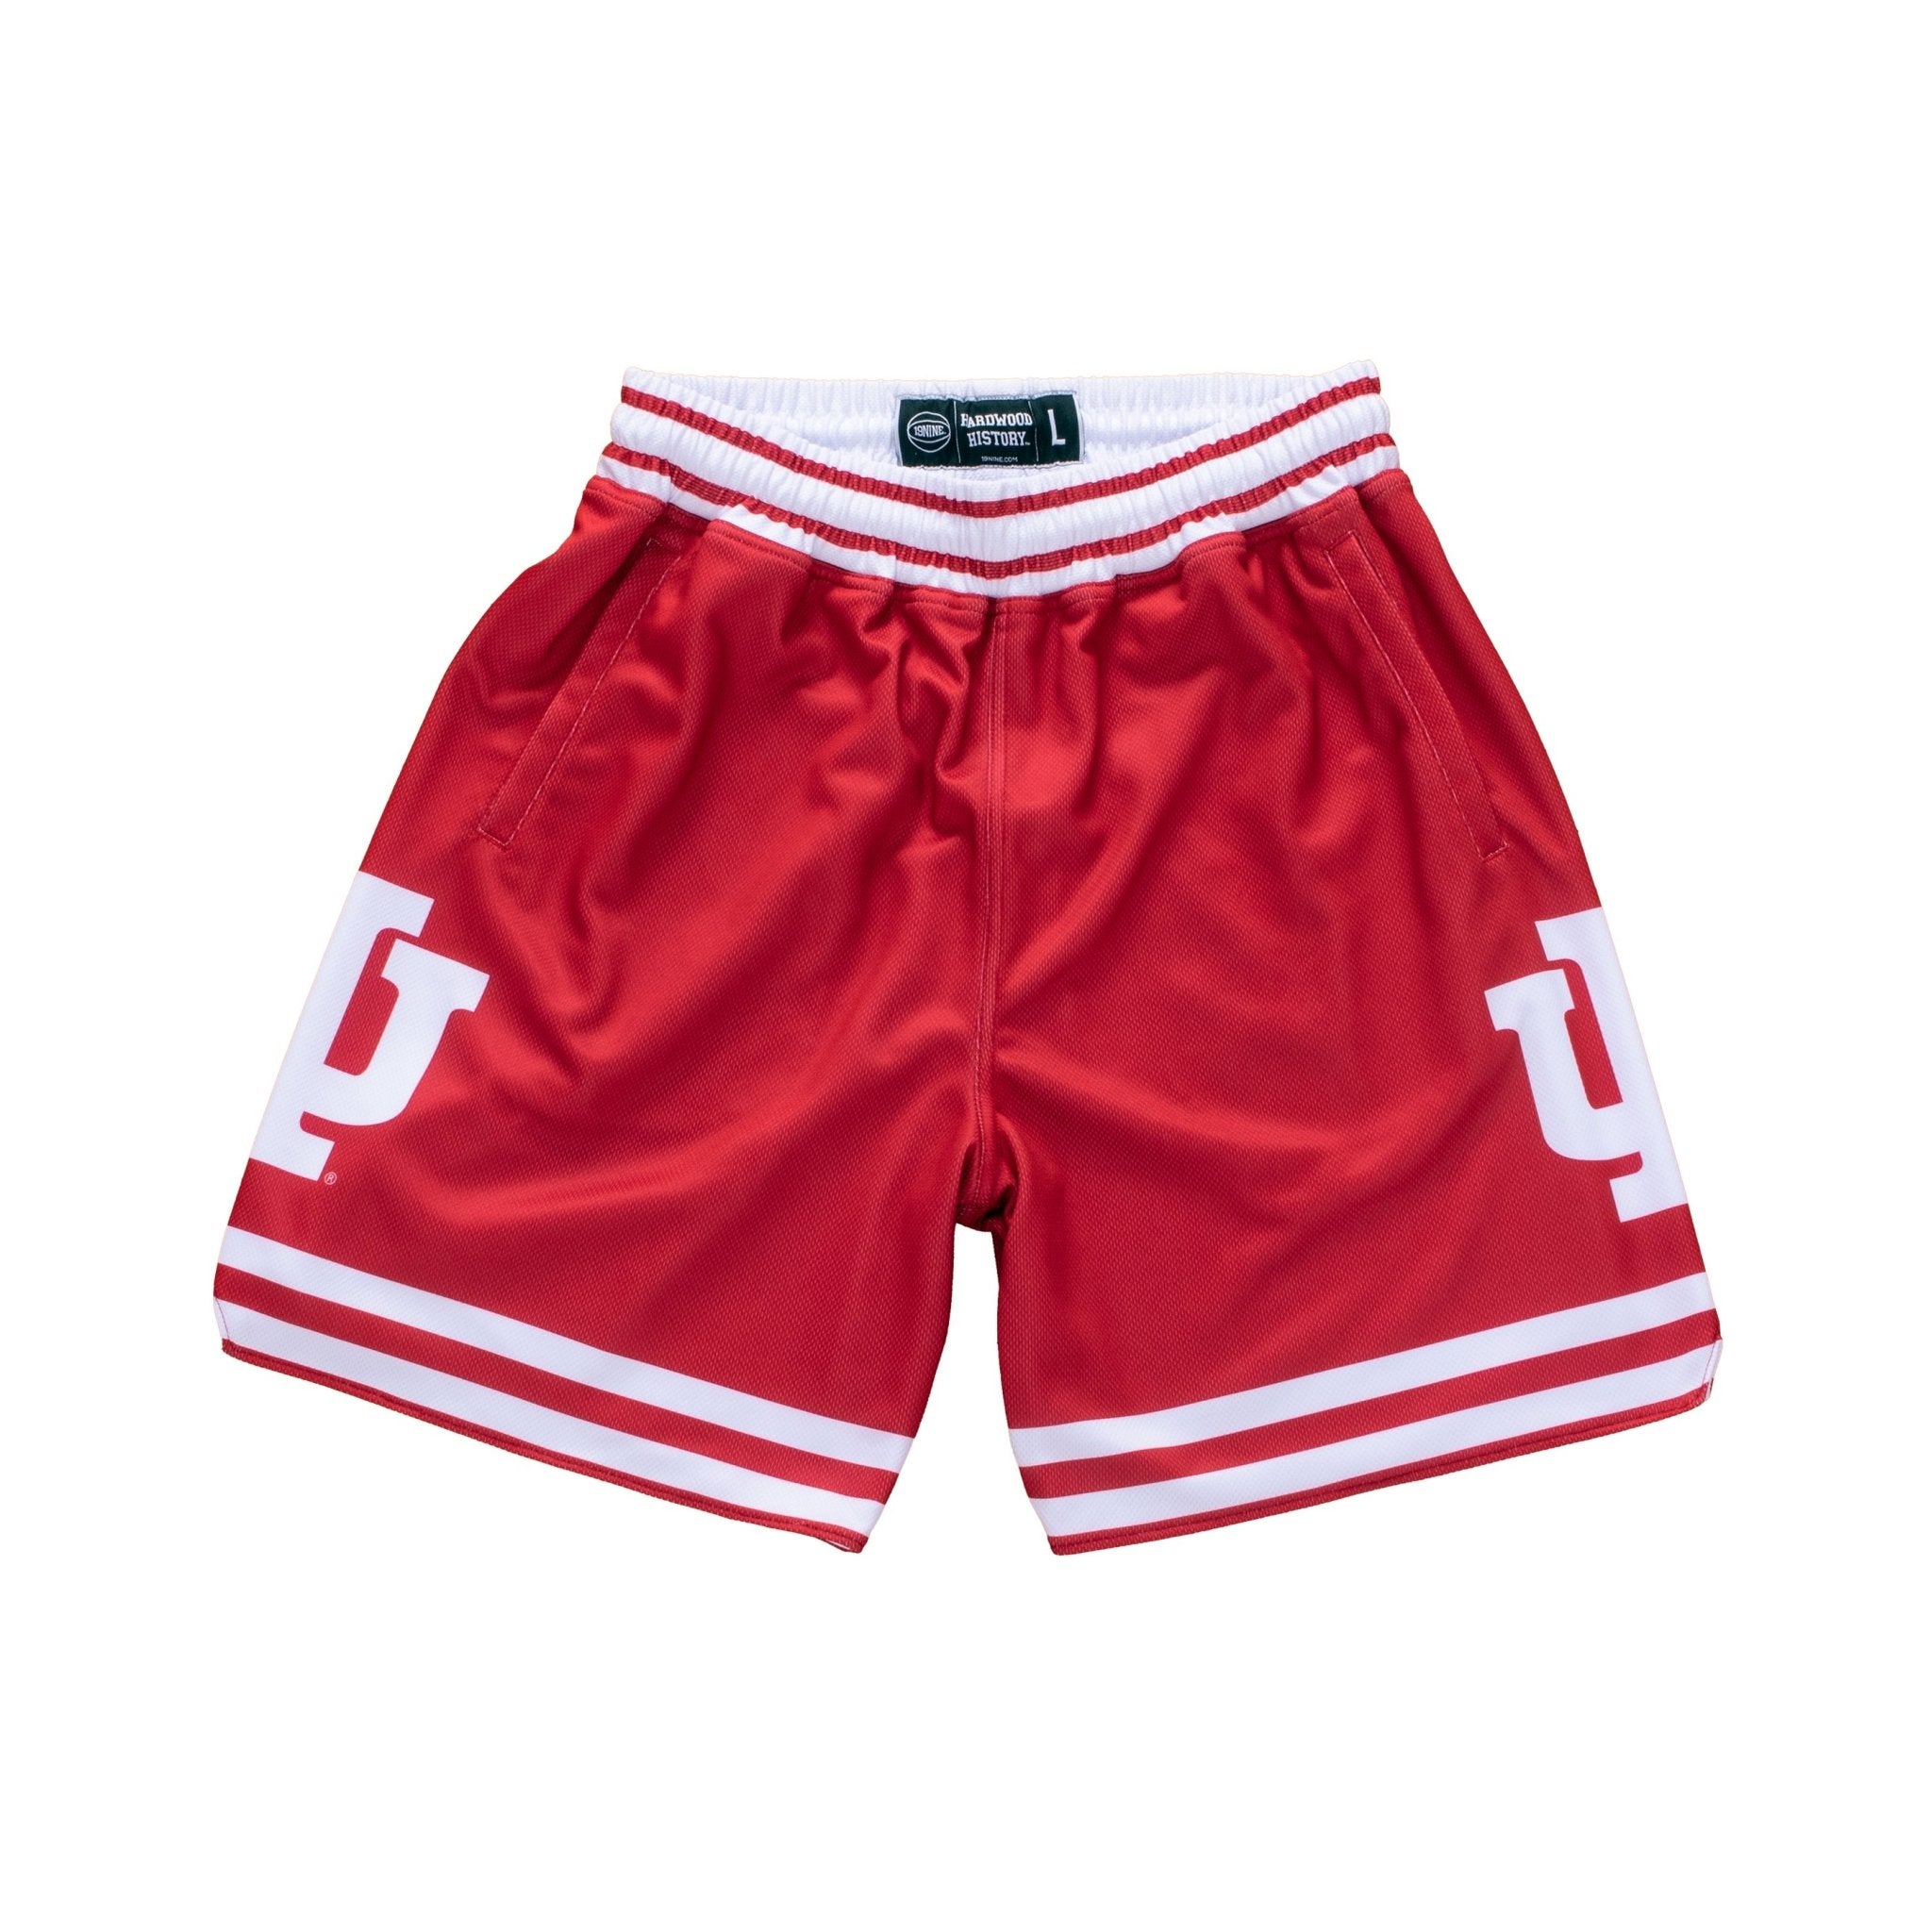 Shop LVM LA NBA-Inspired Shorts Collection - Queen Ballers Club